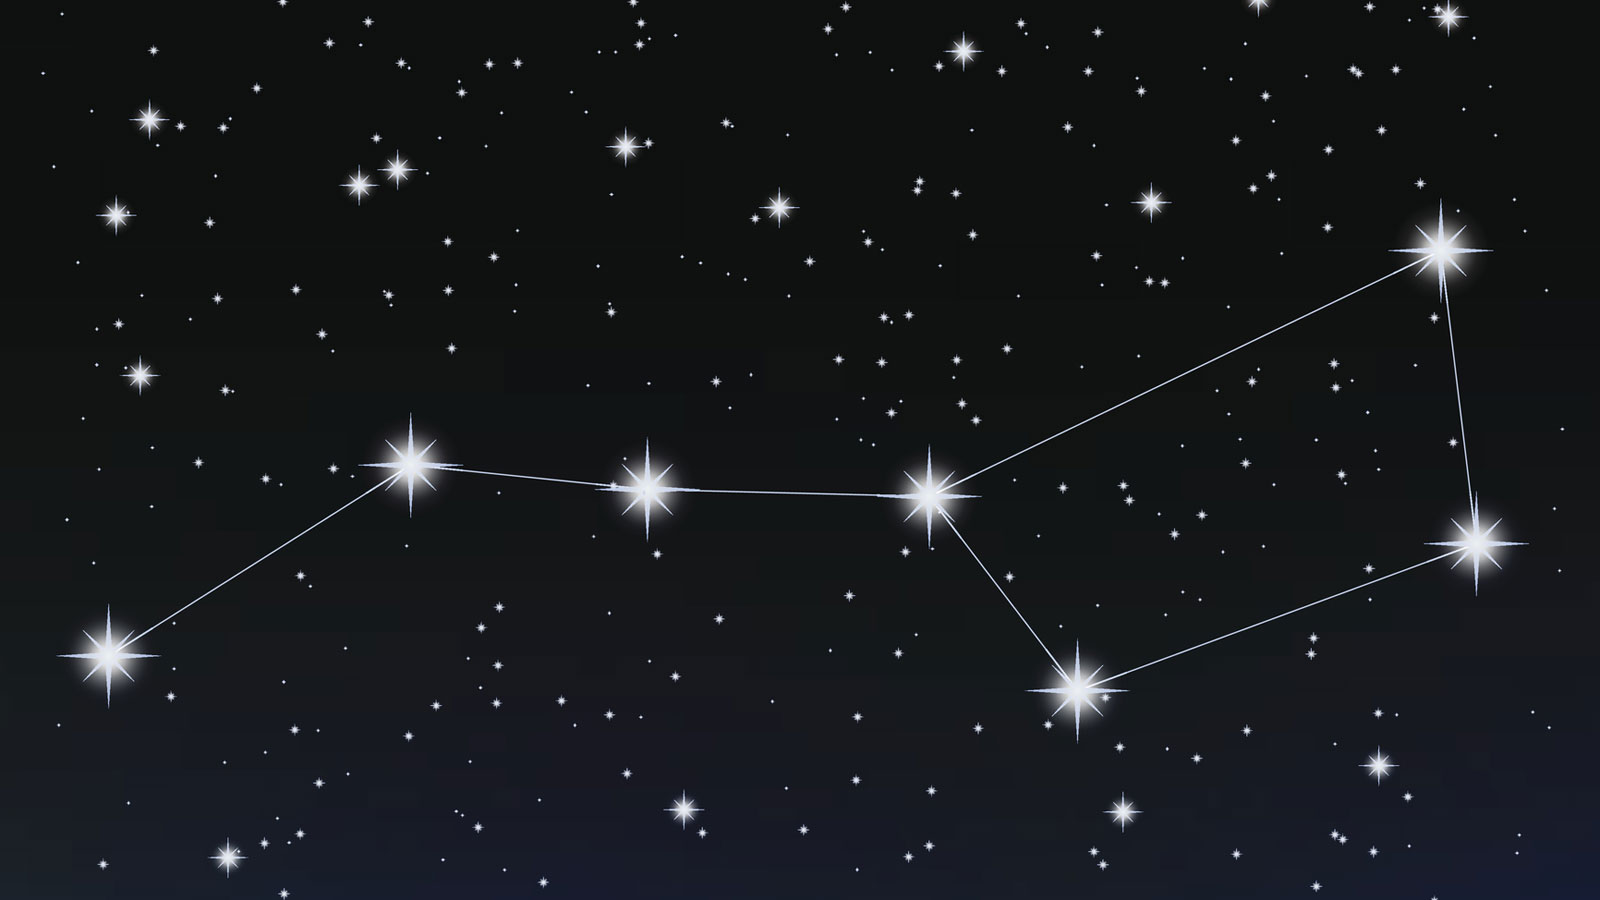 The Big Dipper is not a constellation